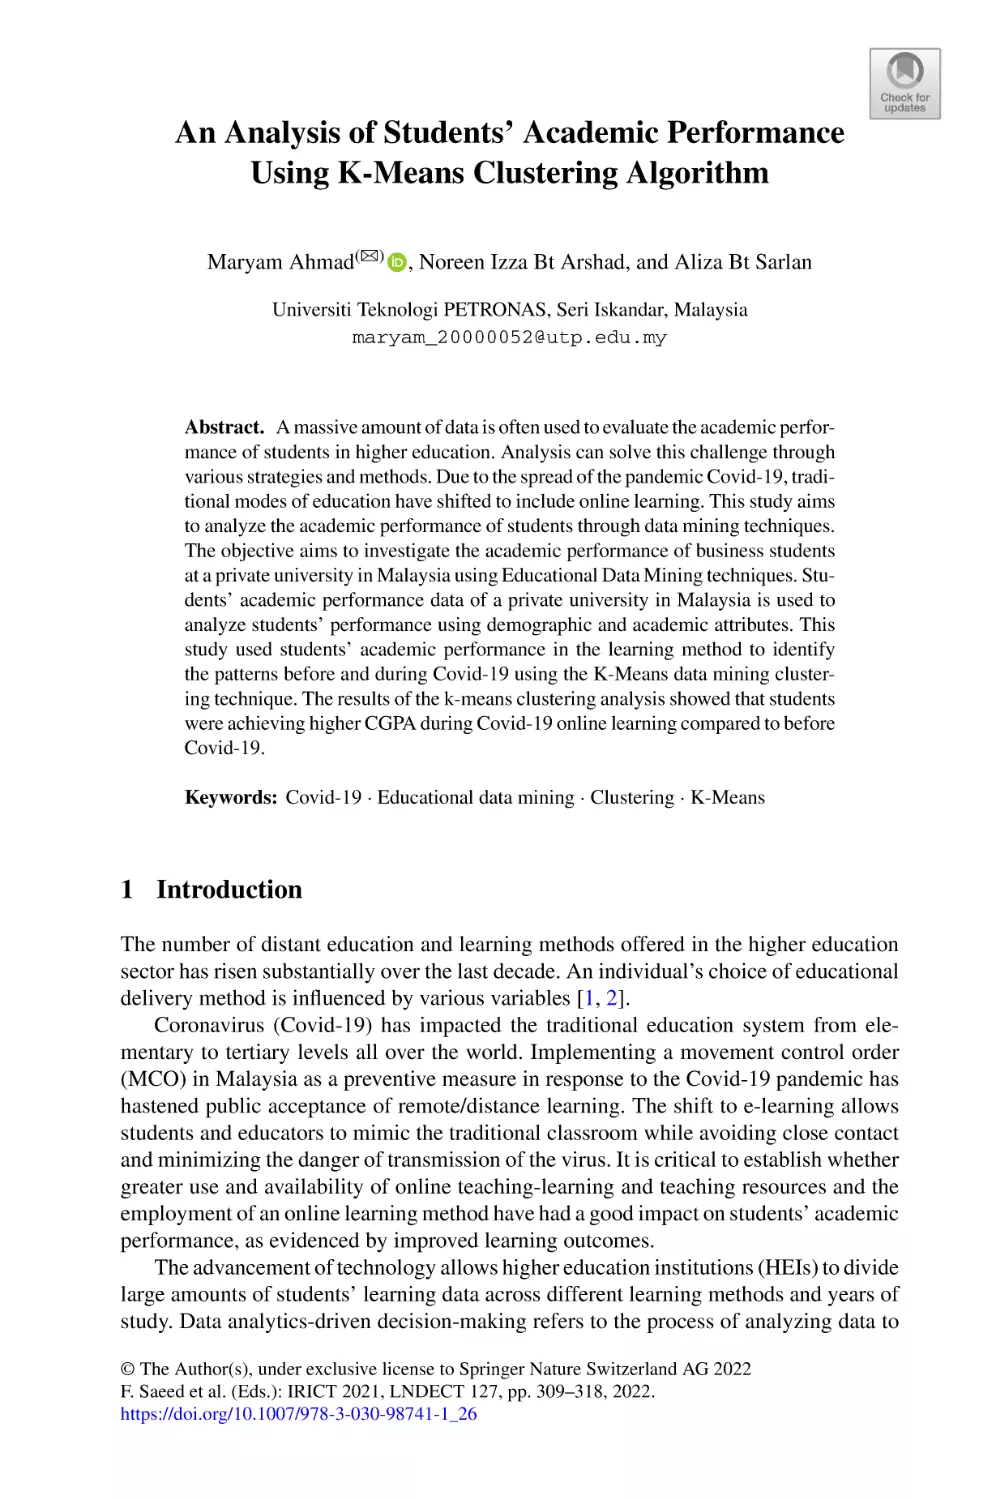 An Analysis of Students’ Academic Performance Using K-Means Clustering Algorithm
1 Introduction